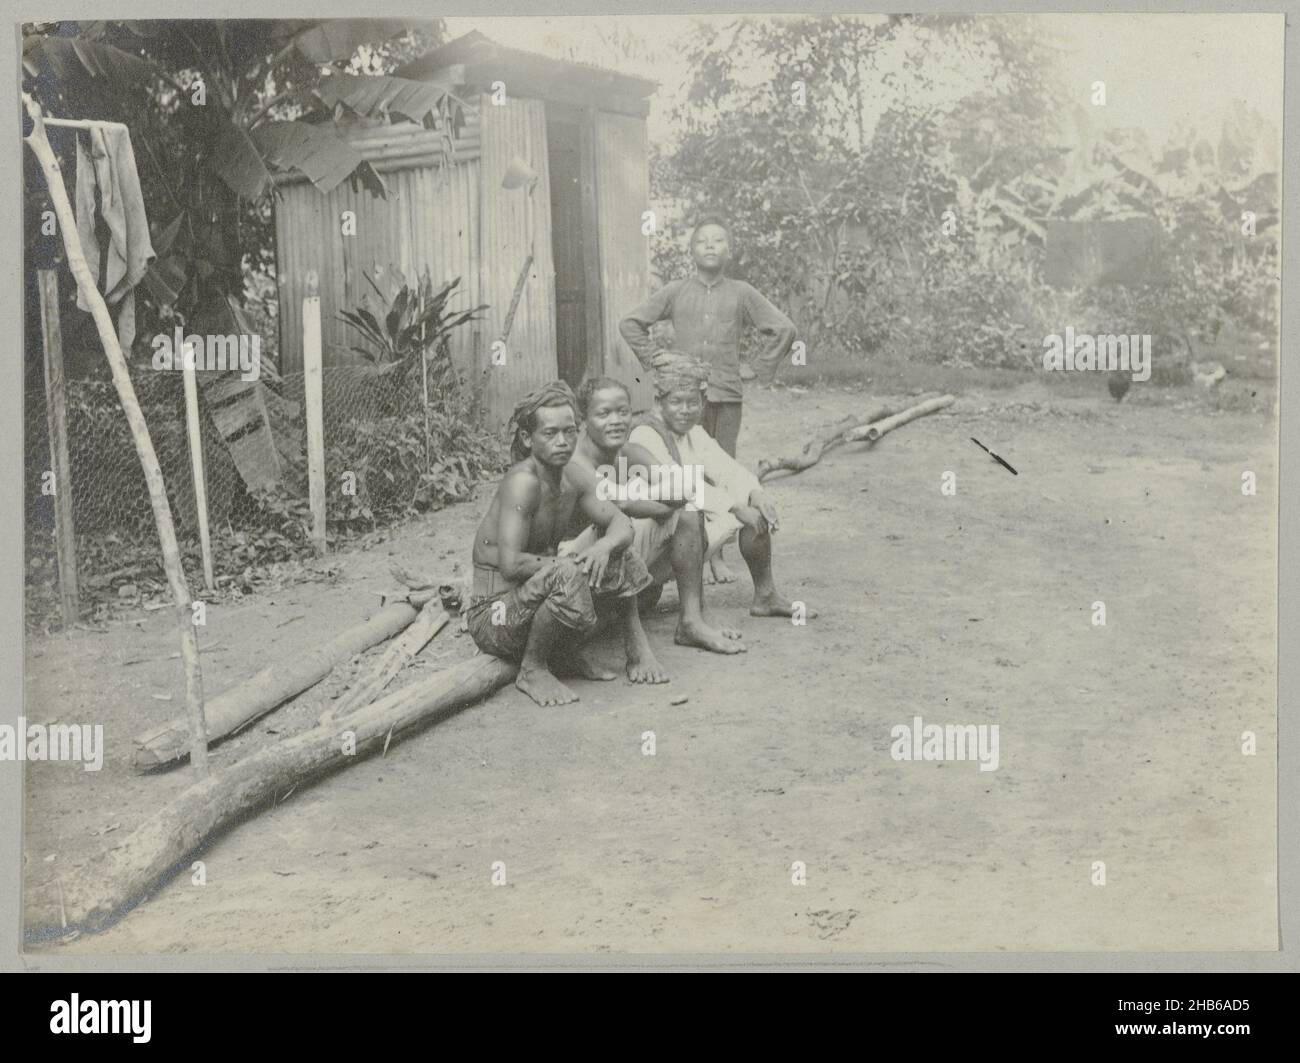 Javanese (title on object), Four Javanese contract workers. Part of the photo album Souvenir de Voyage (volume 5), about the life of the Doijer family in and around the plantation Ma Retraite in Suriname in the years 1906-1913., Hendrik Doijer (attributed to), Suriname, 1906 - 1913, photographic support, gelatin silver print, height 83 mm × width 111 mm Stock Photo